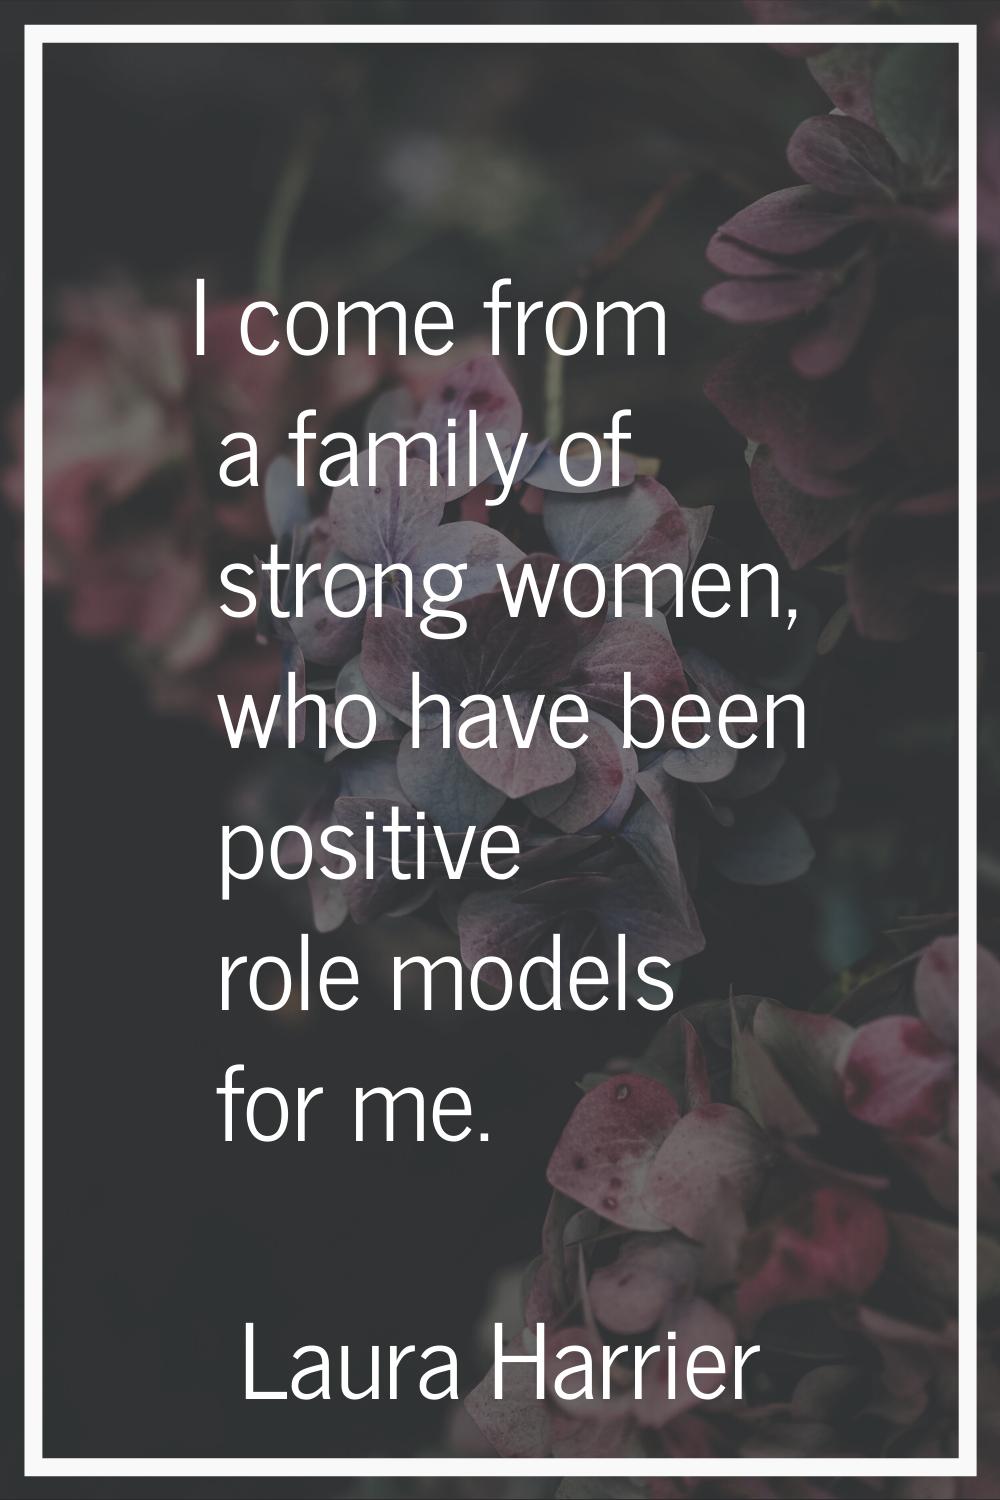 I come from a family of strong women, who have been positive role models for me.